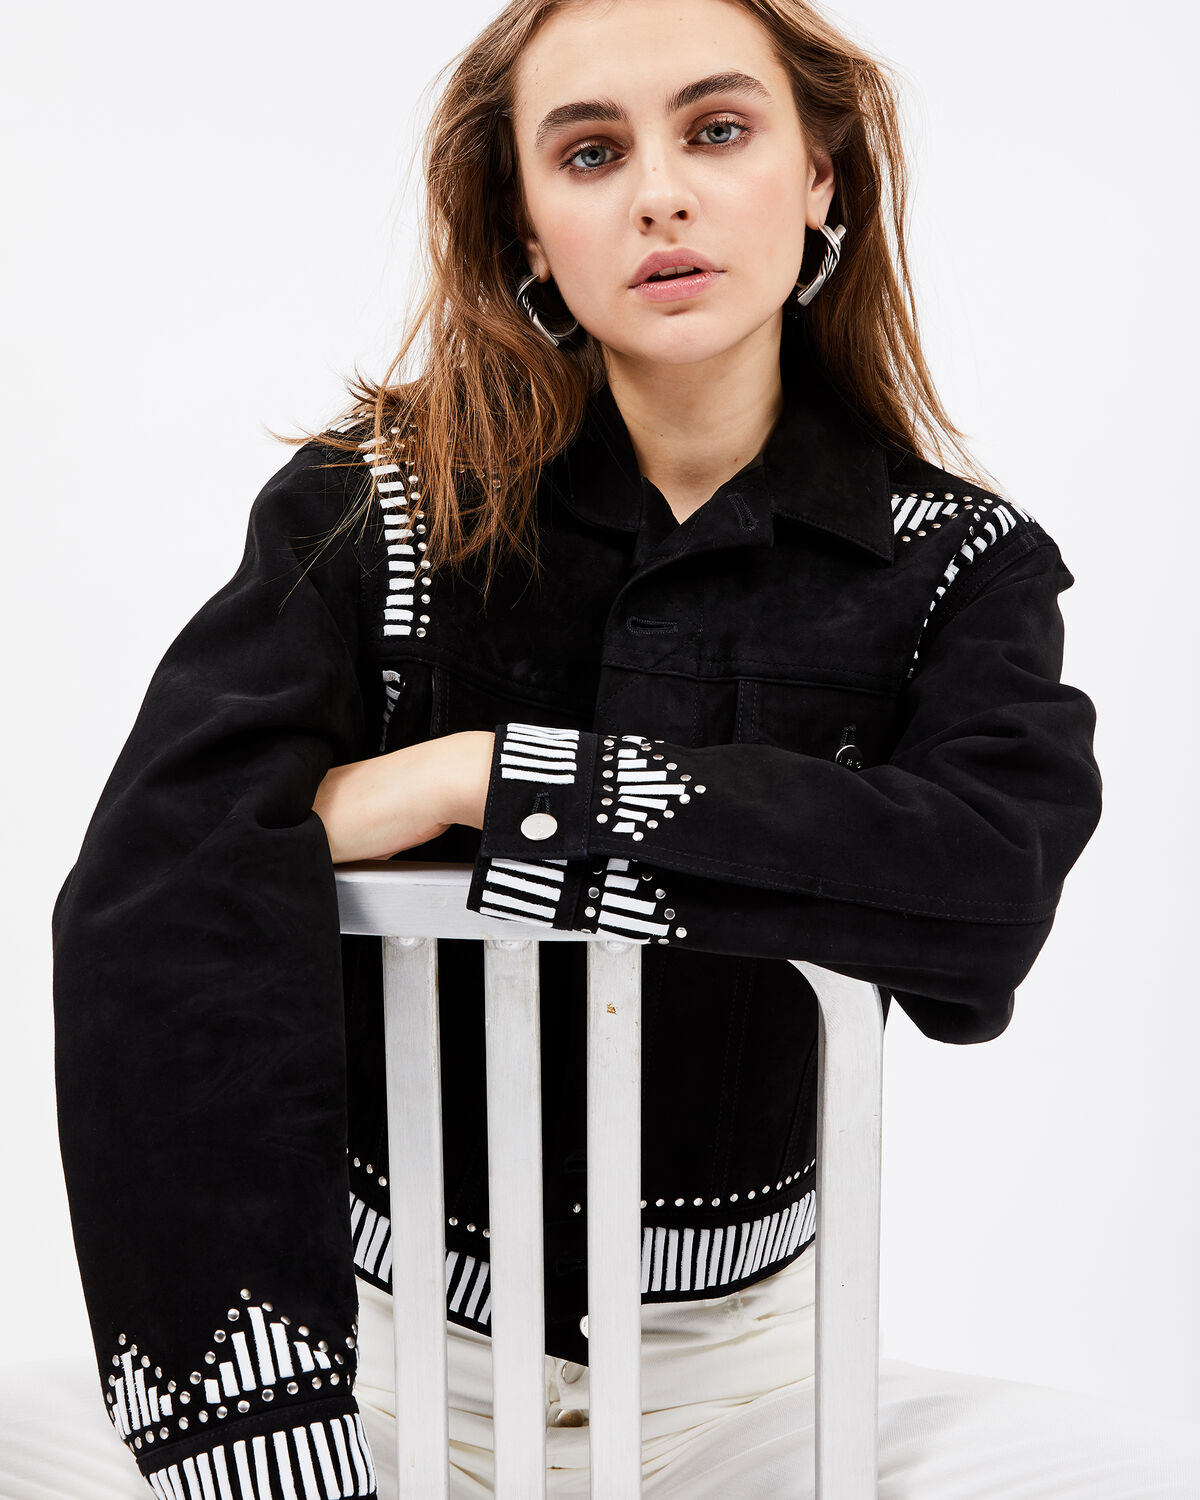 August Jacket Black And White by IRO Paris